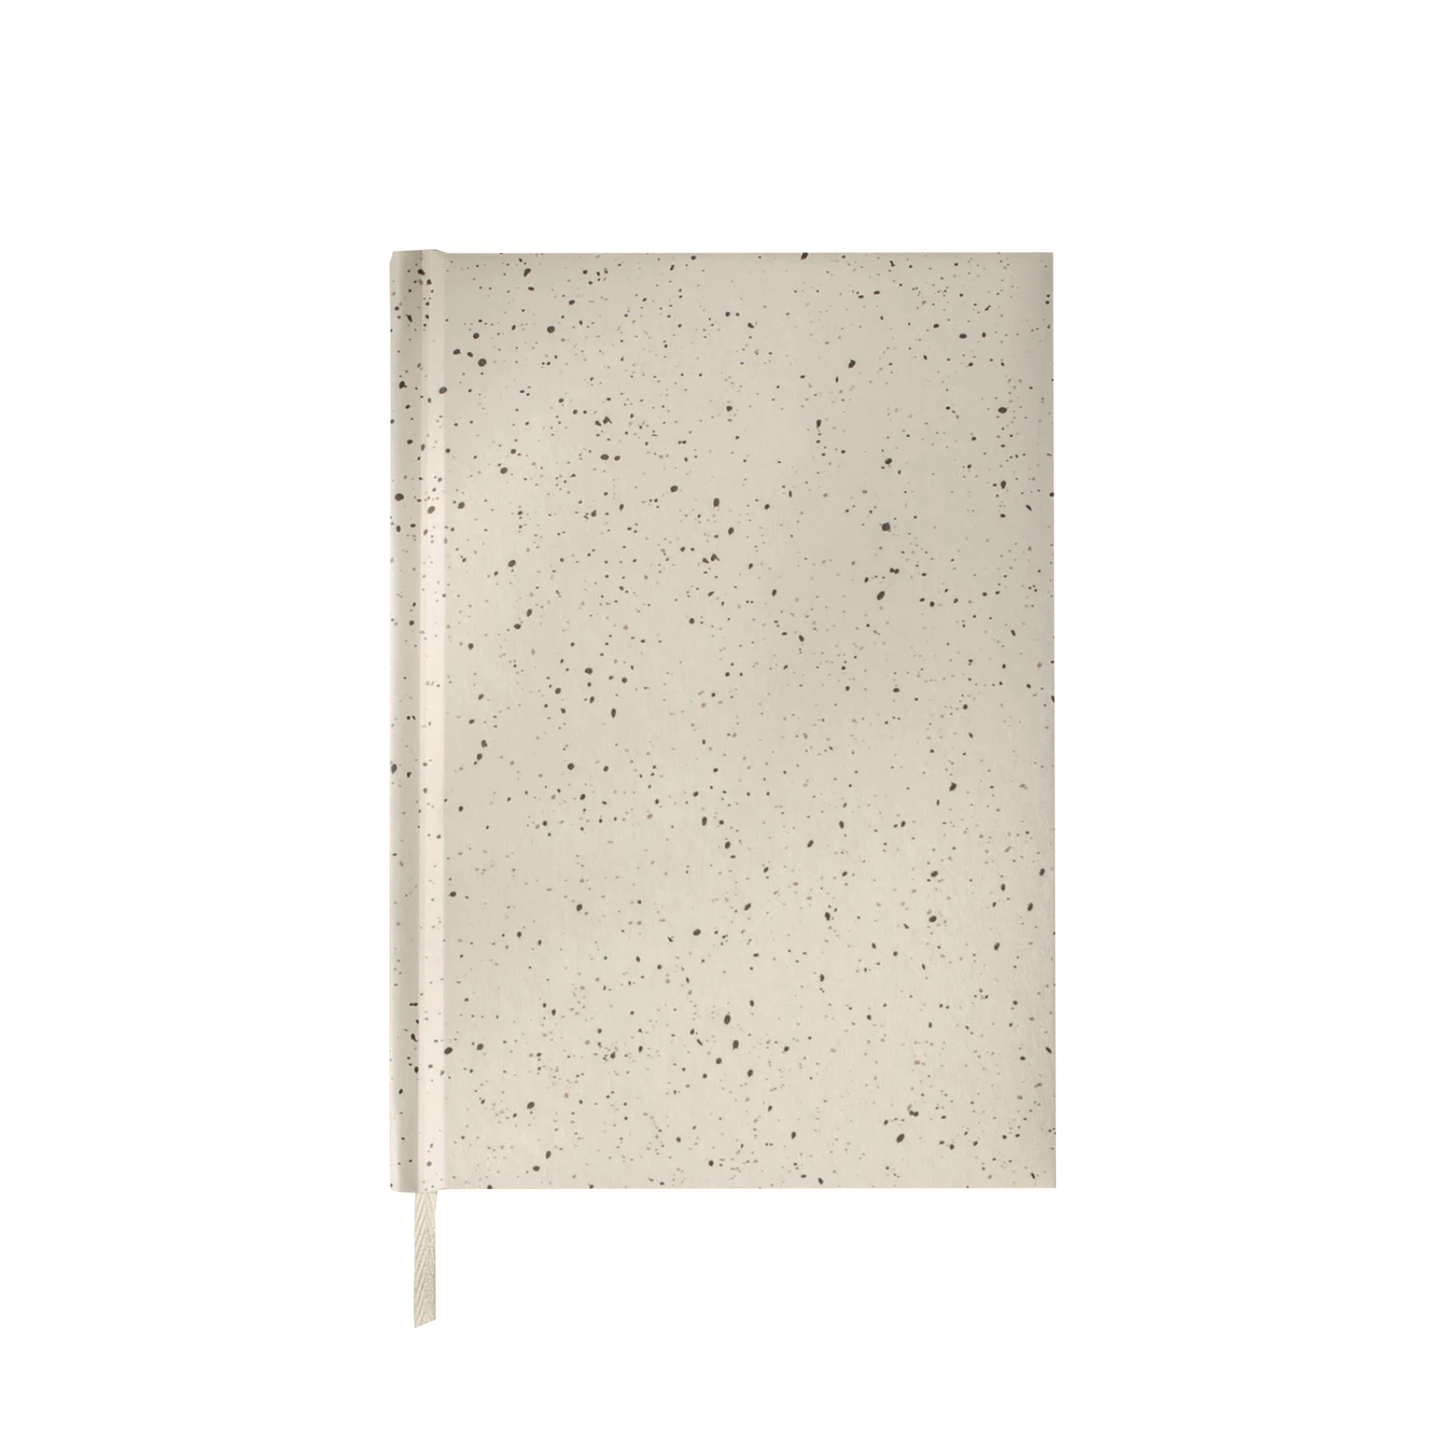 A5 Hard Cover Notebook - Speckle Print